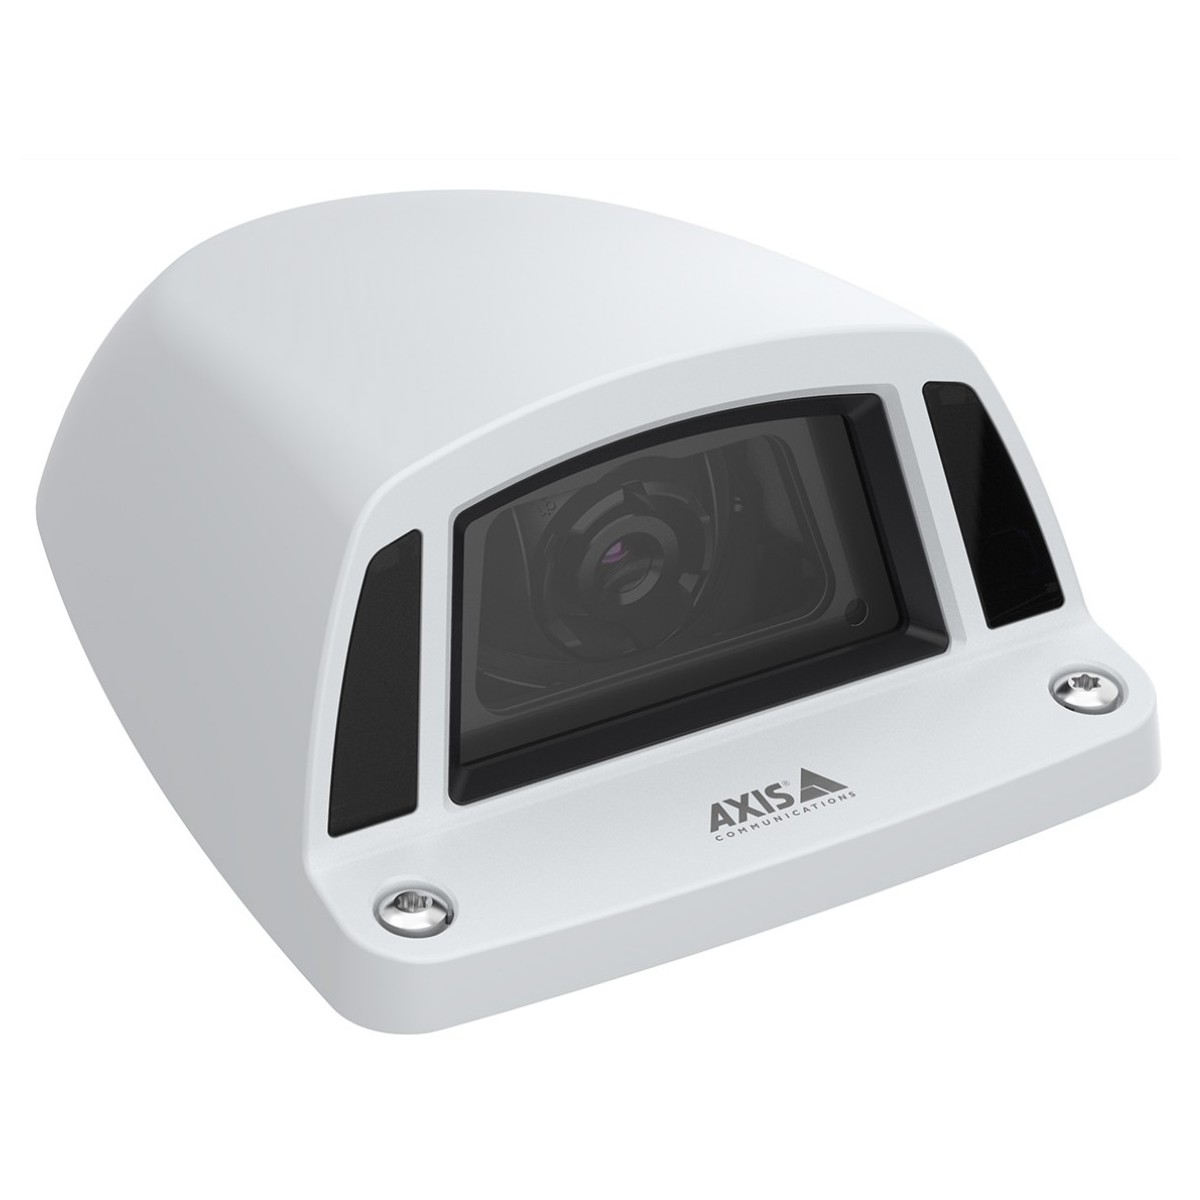 Axis P3925-LRE M12 - IP security camera - Indoor - Wired - Digital PTZ - Simplified Chinese - Traditional Chinese - German - Eng